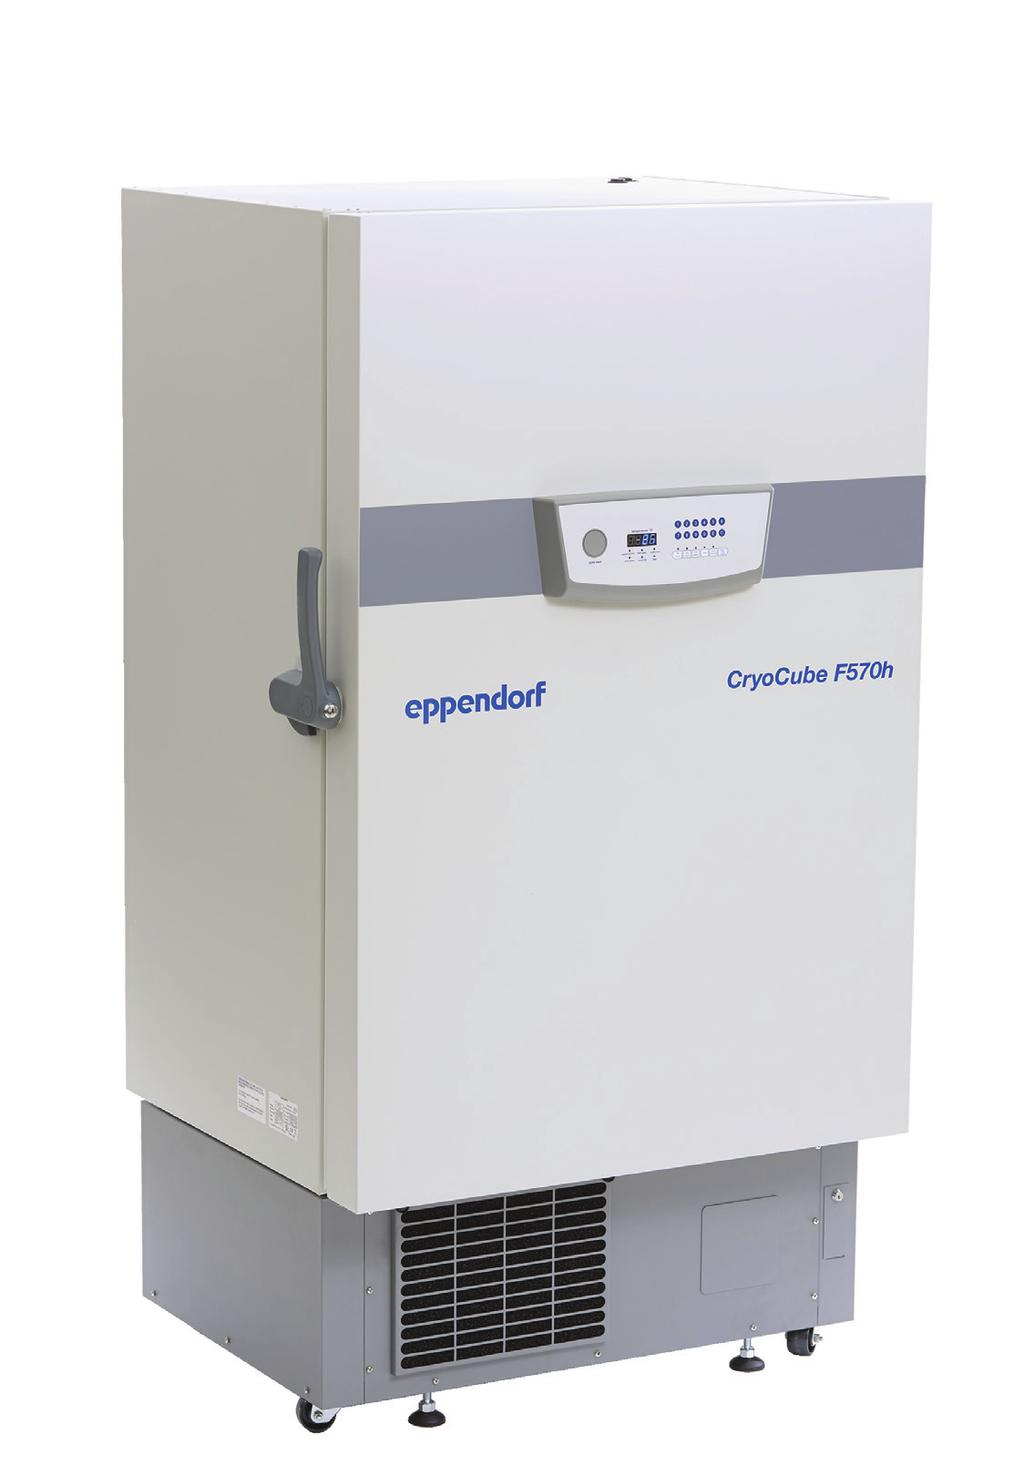 4 Eppendorf High-Efficiency ULT Freezers For Eppendorf, being green is not a trend, it s in our nature.